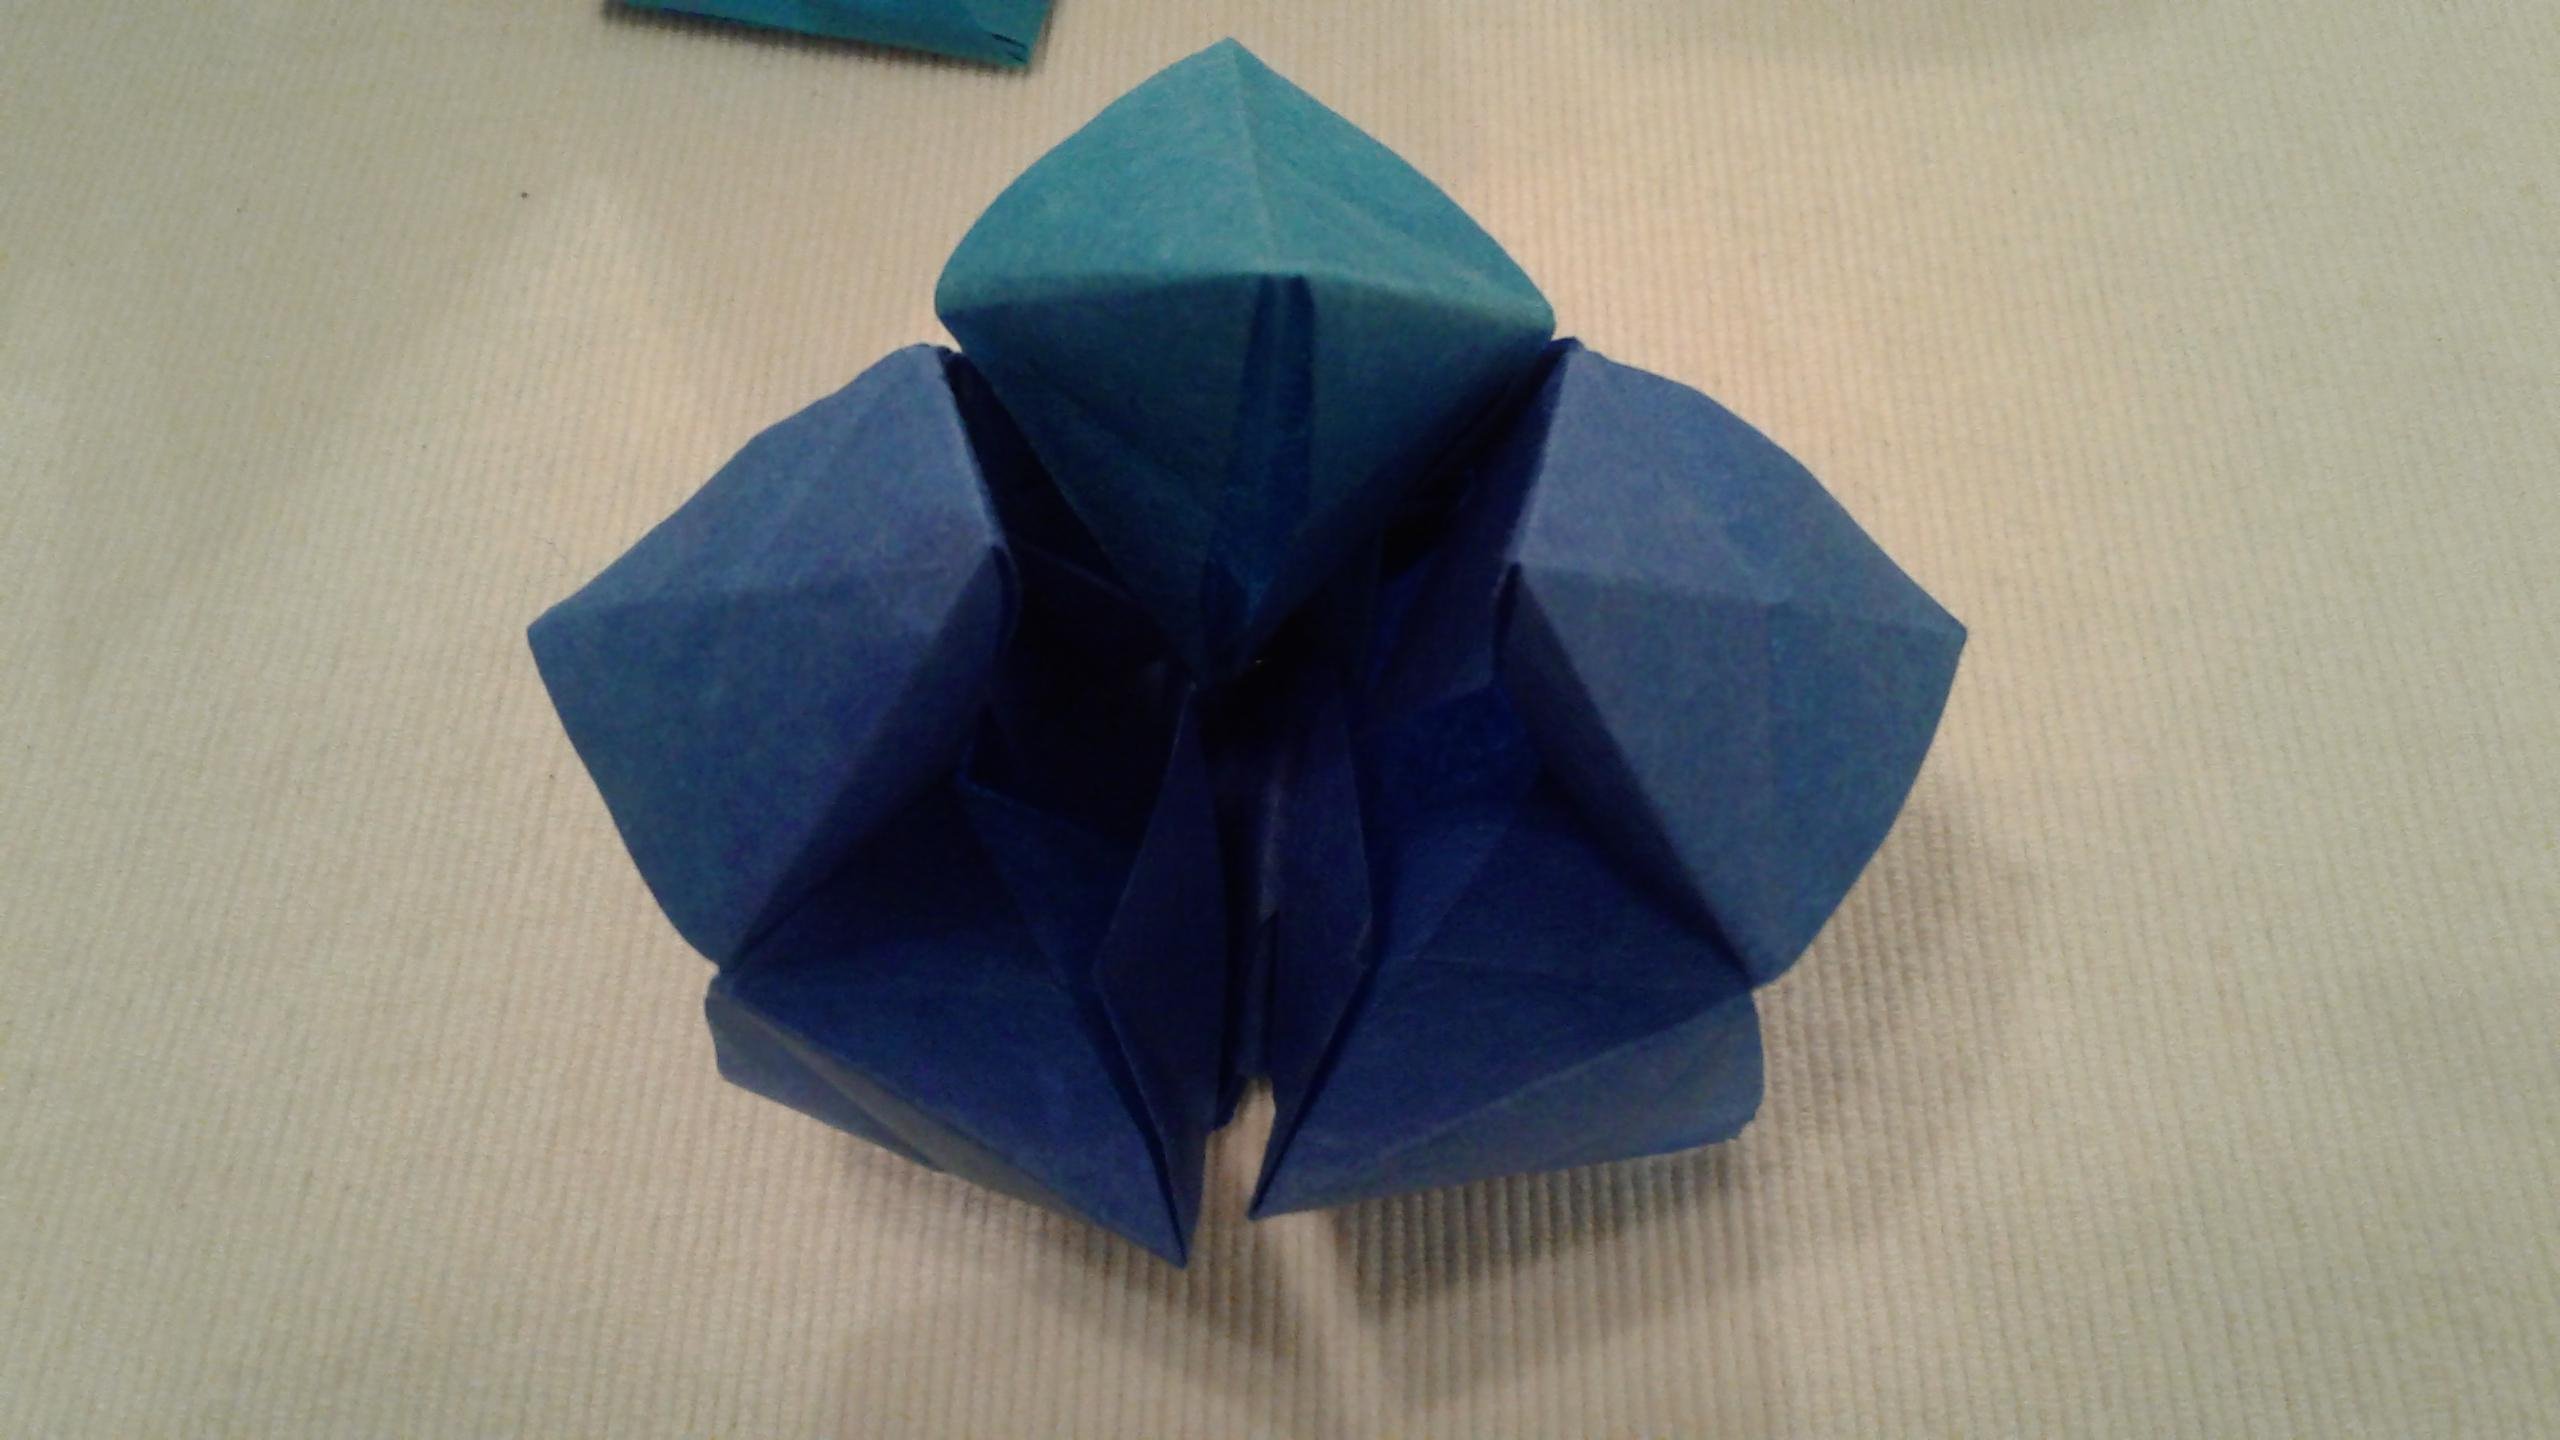 How Do You Make Origami Fortune Tellers Origami Extended Fortune Teller With 4 Flaps Arts Crafts